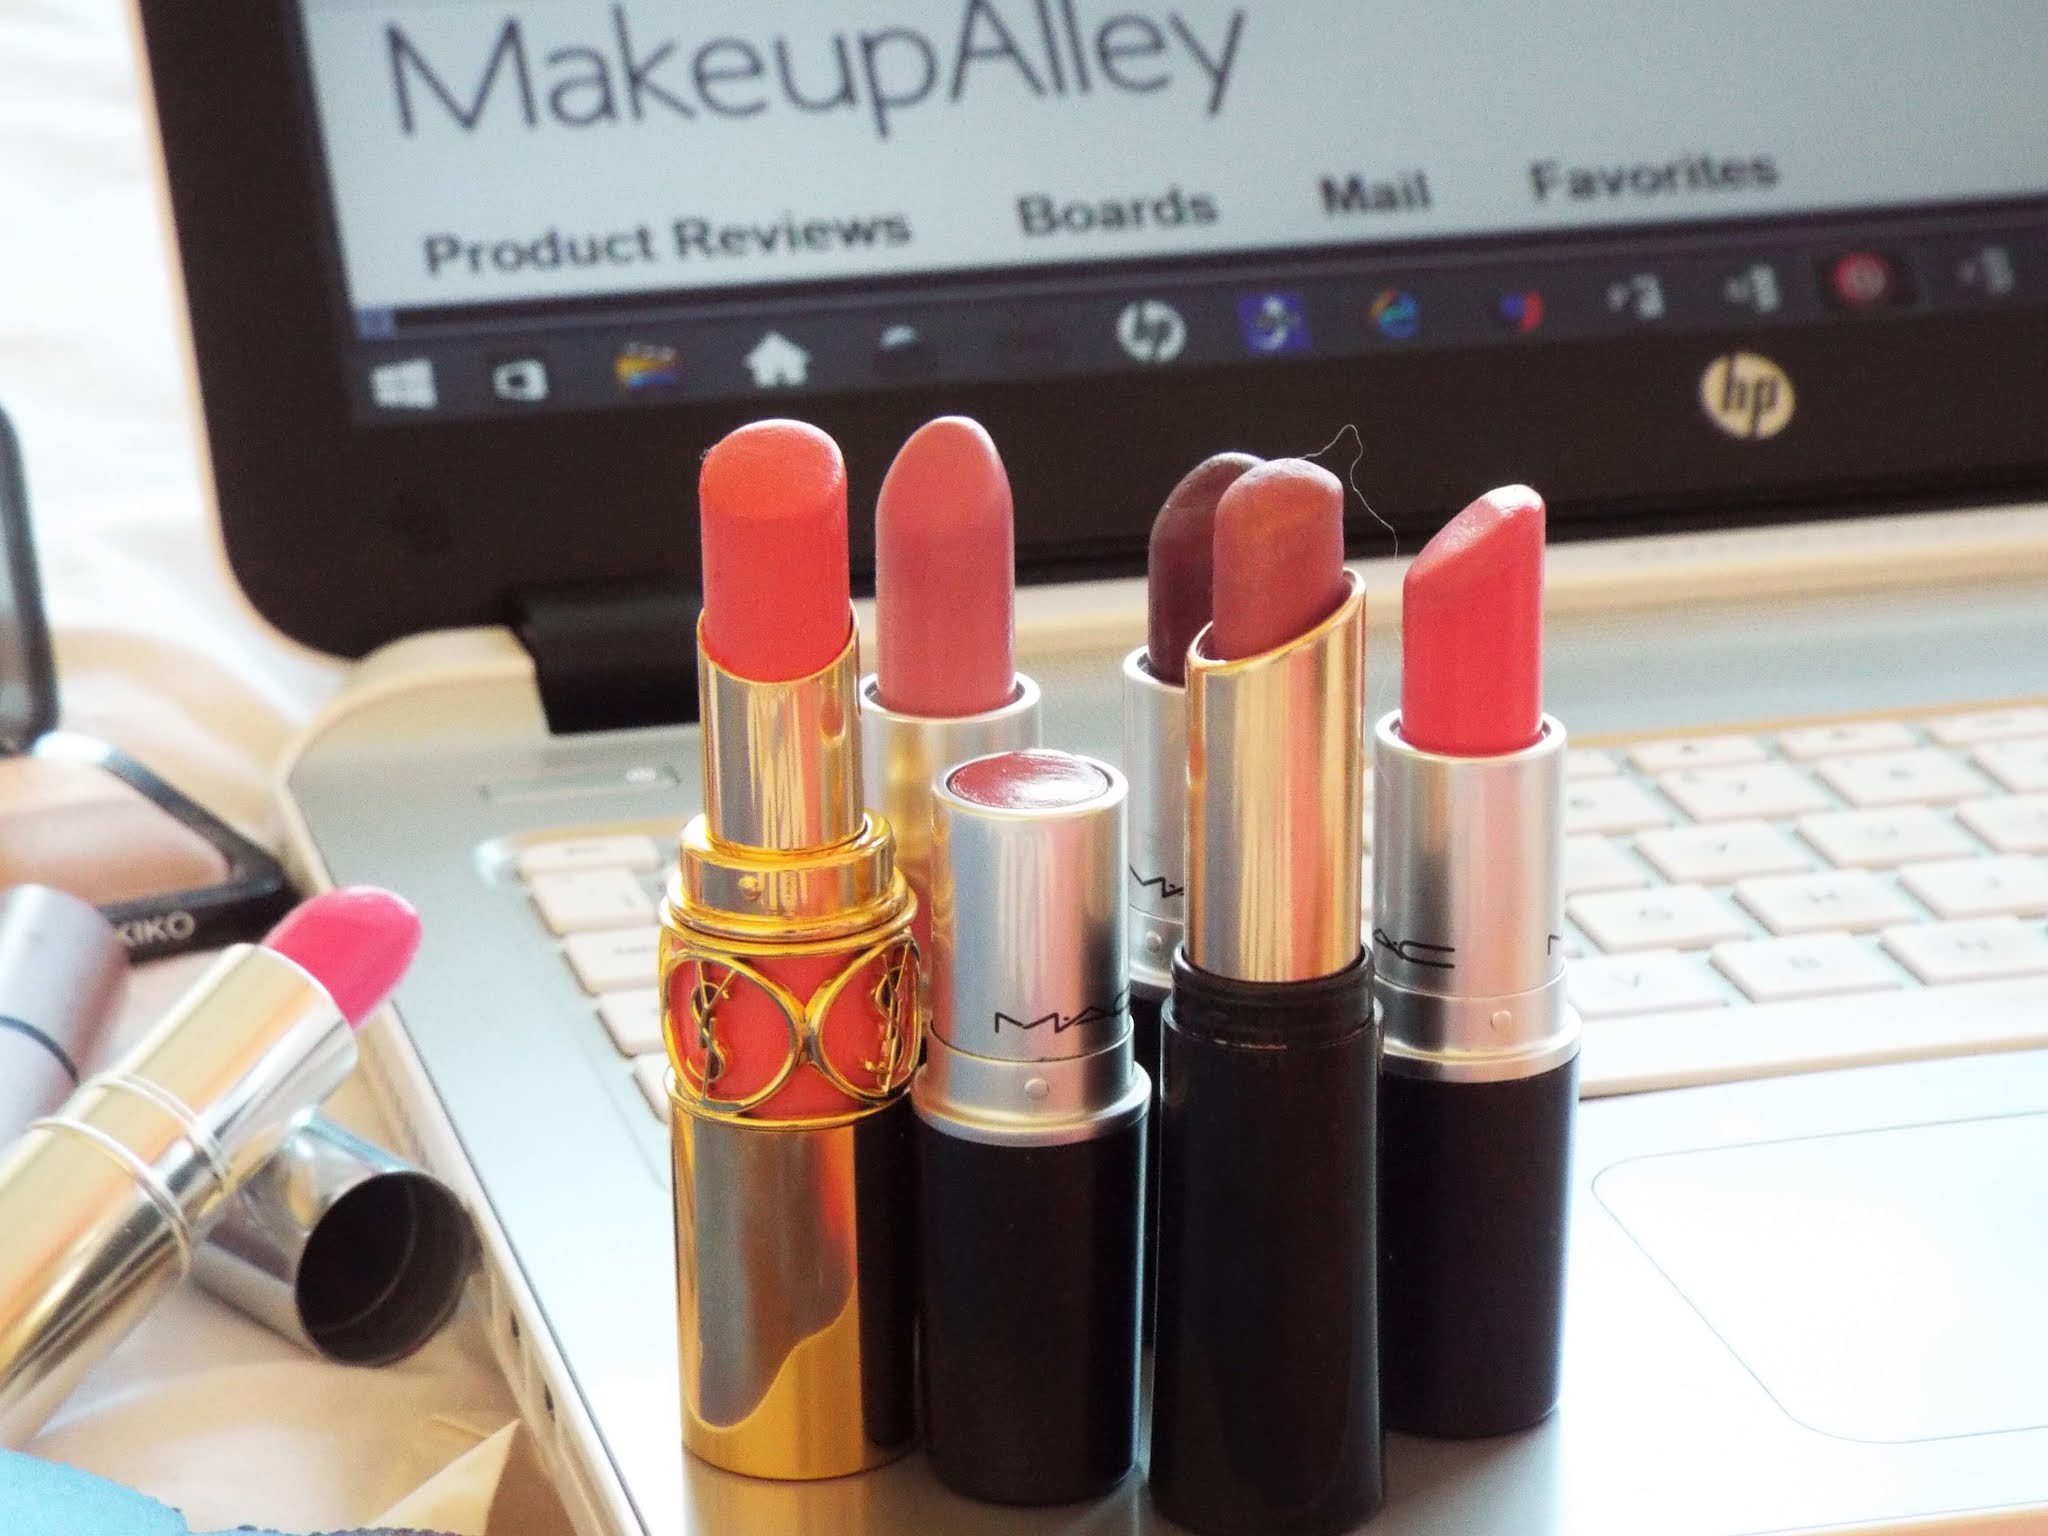 Group of lipsticks, YSL, MAC, No7, sat on my laptop with Makeup Alley website on screen.